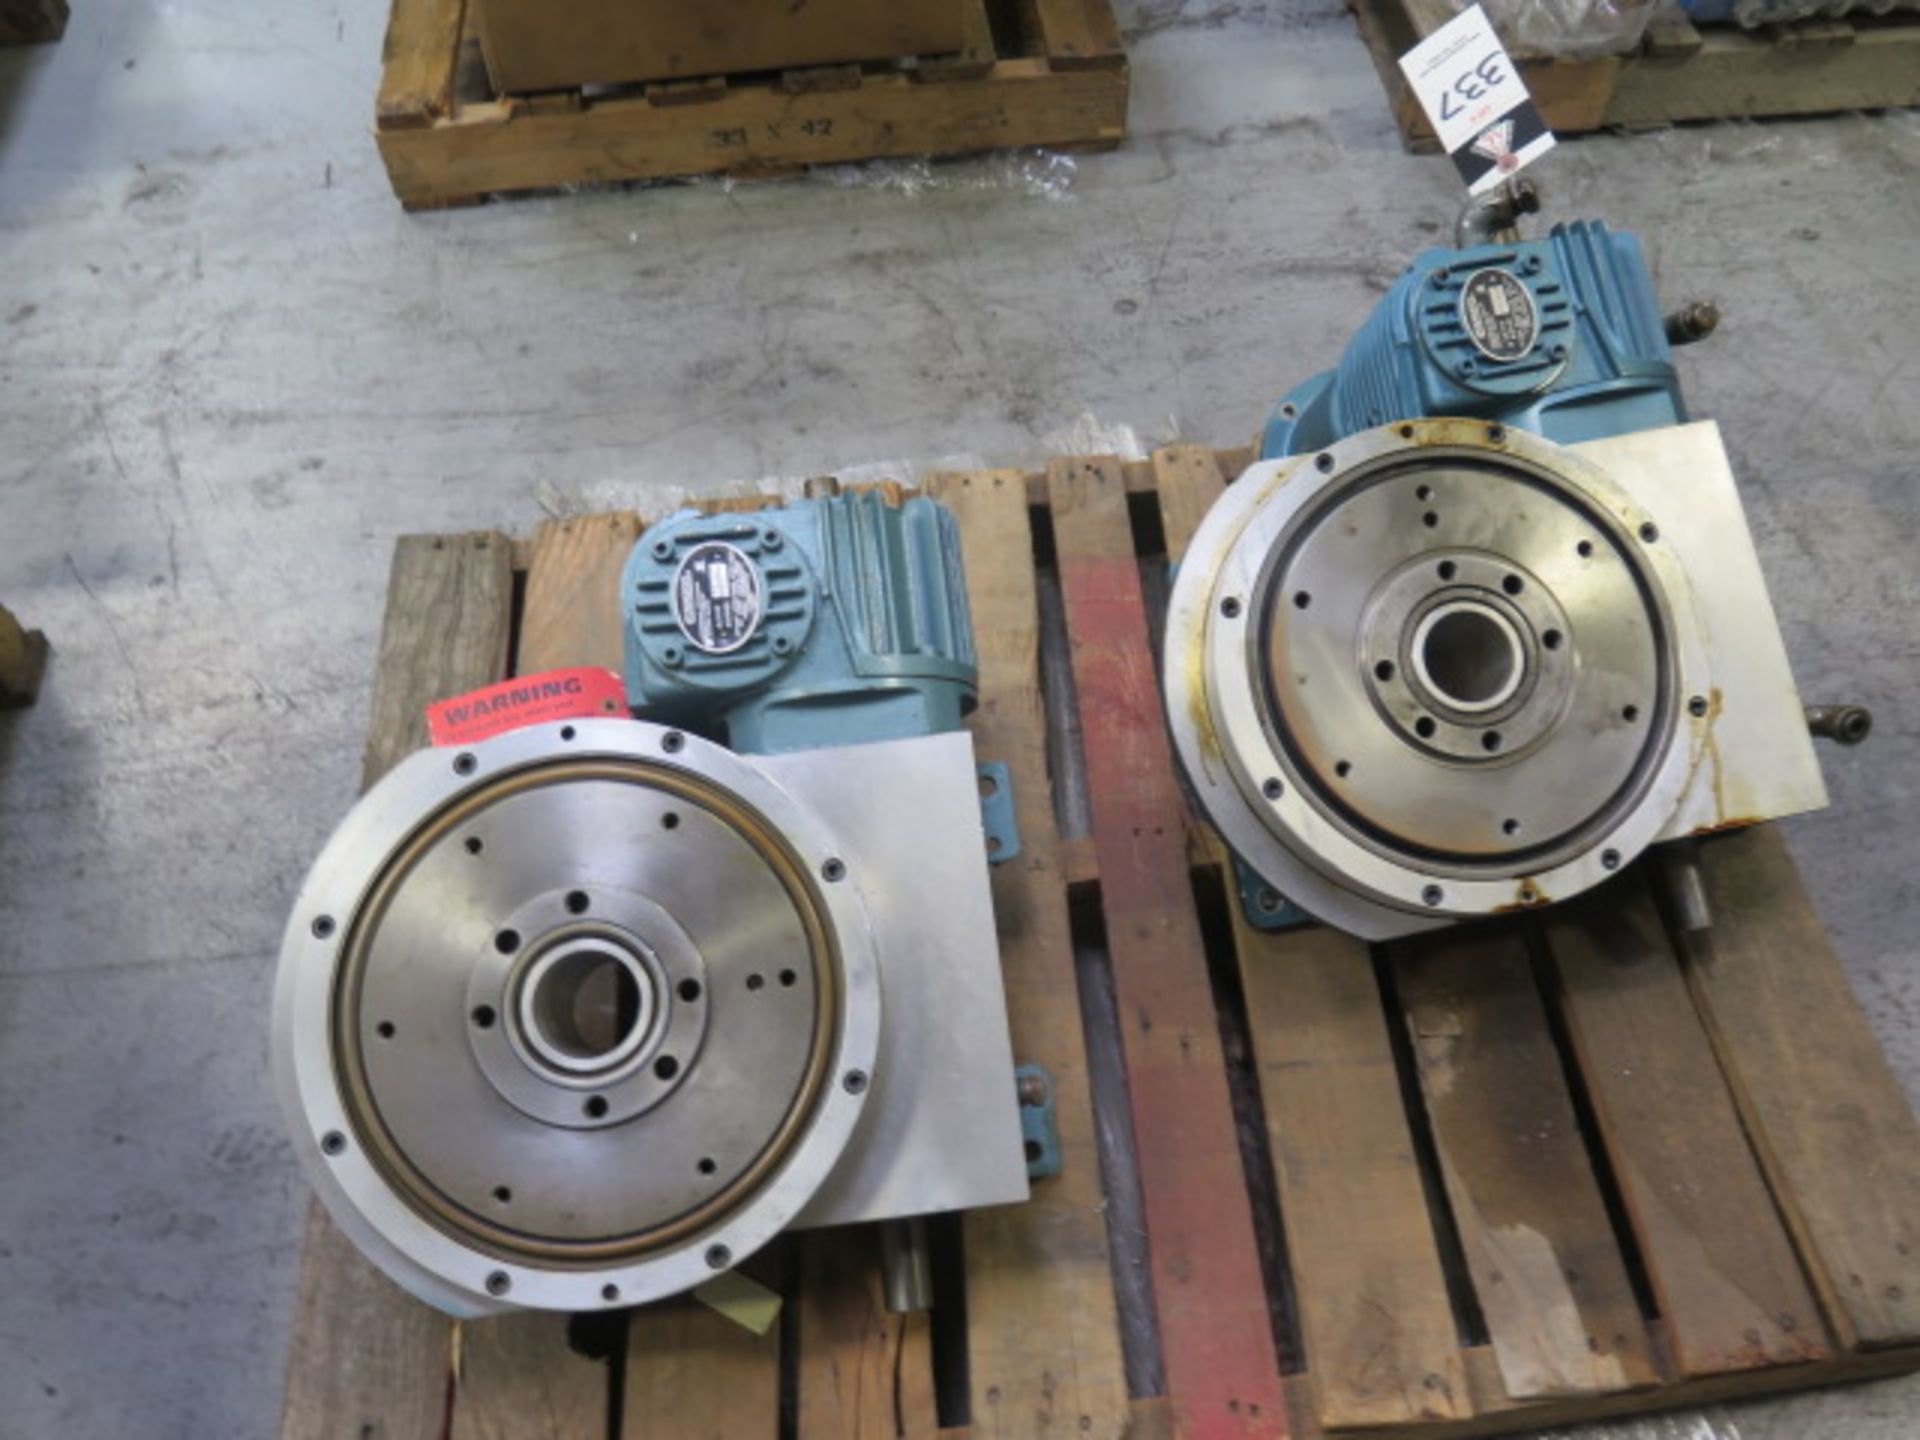 Camco mdls. 902-RDM 12H32-270 and 902RDM8H32-270 Geared Rotary Heads (NO MOTORS) - Image 2 of 4